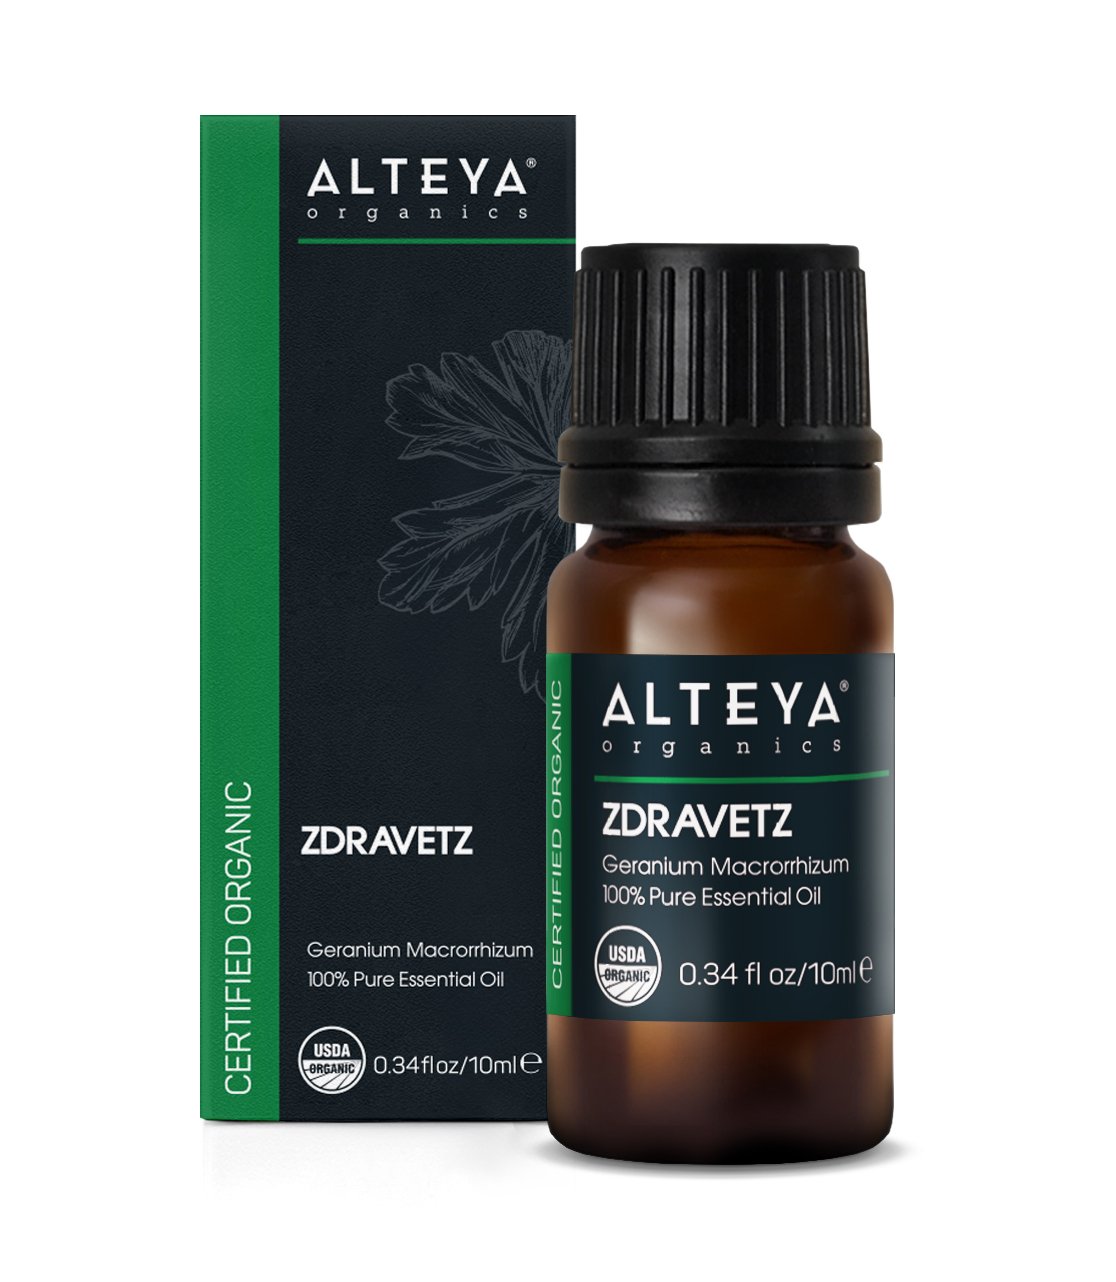 Alteya Organics offers the finest quality Geranium macrorrhizum essential oil sourced from Bulgaria, renowned for its rich Bulgarian culture and known benefits for oily skin.